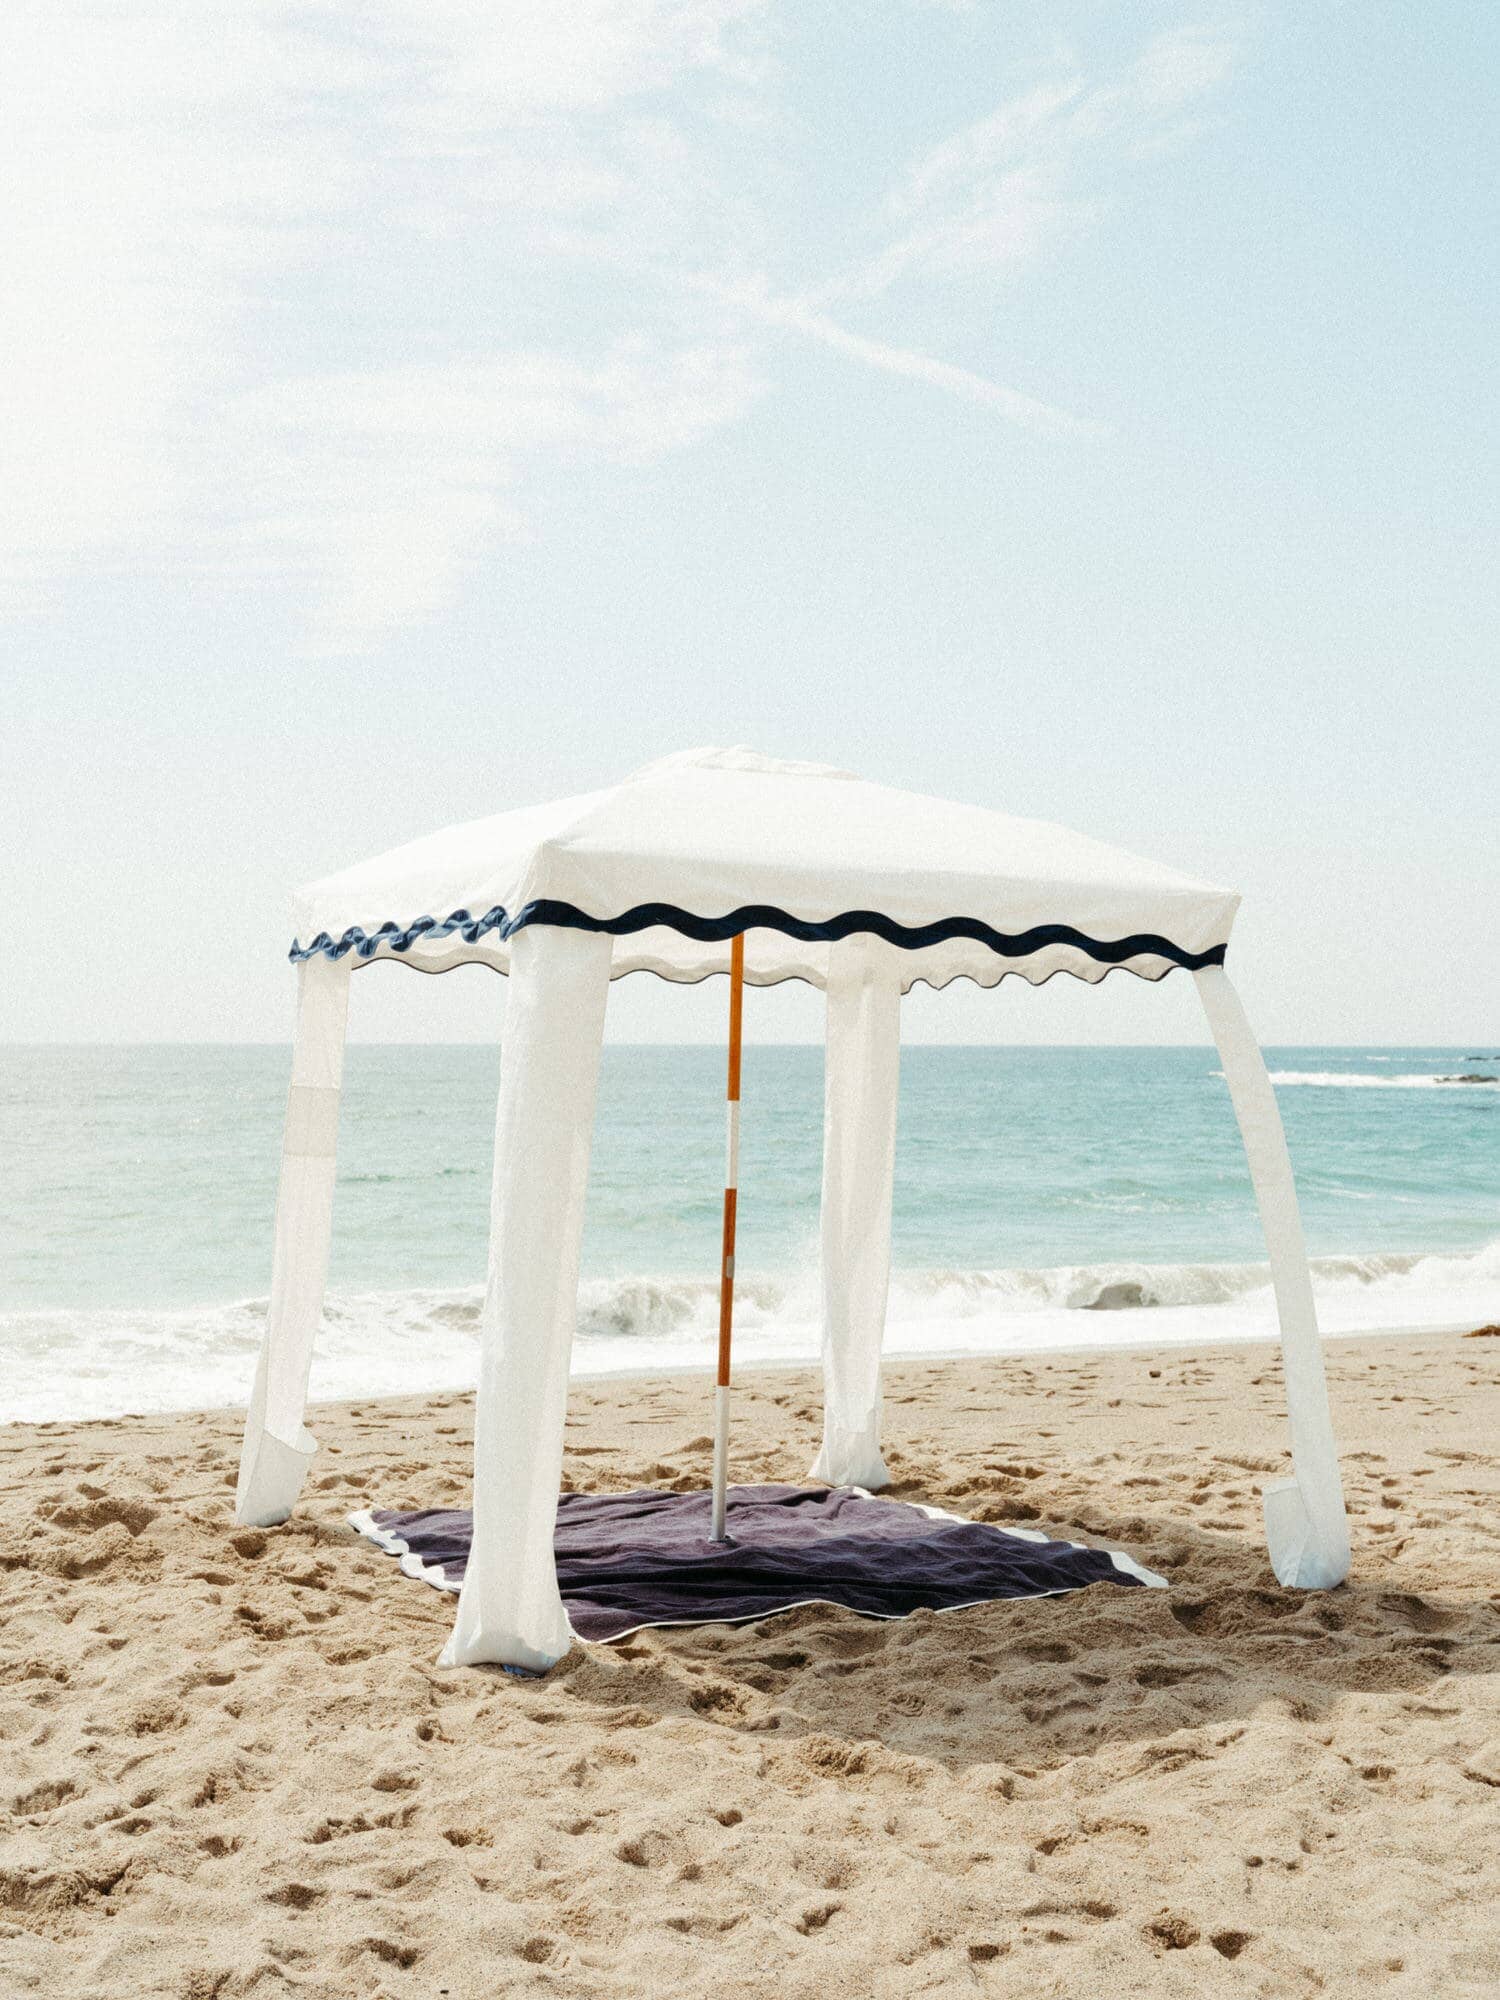 riviera white blanket, cabana, cooler and table on the beach